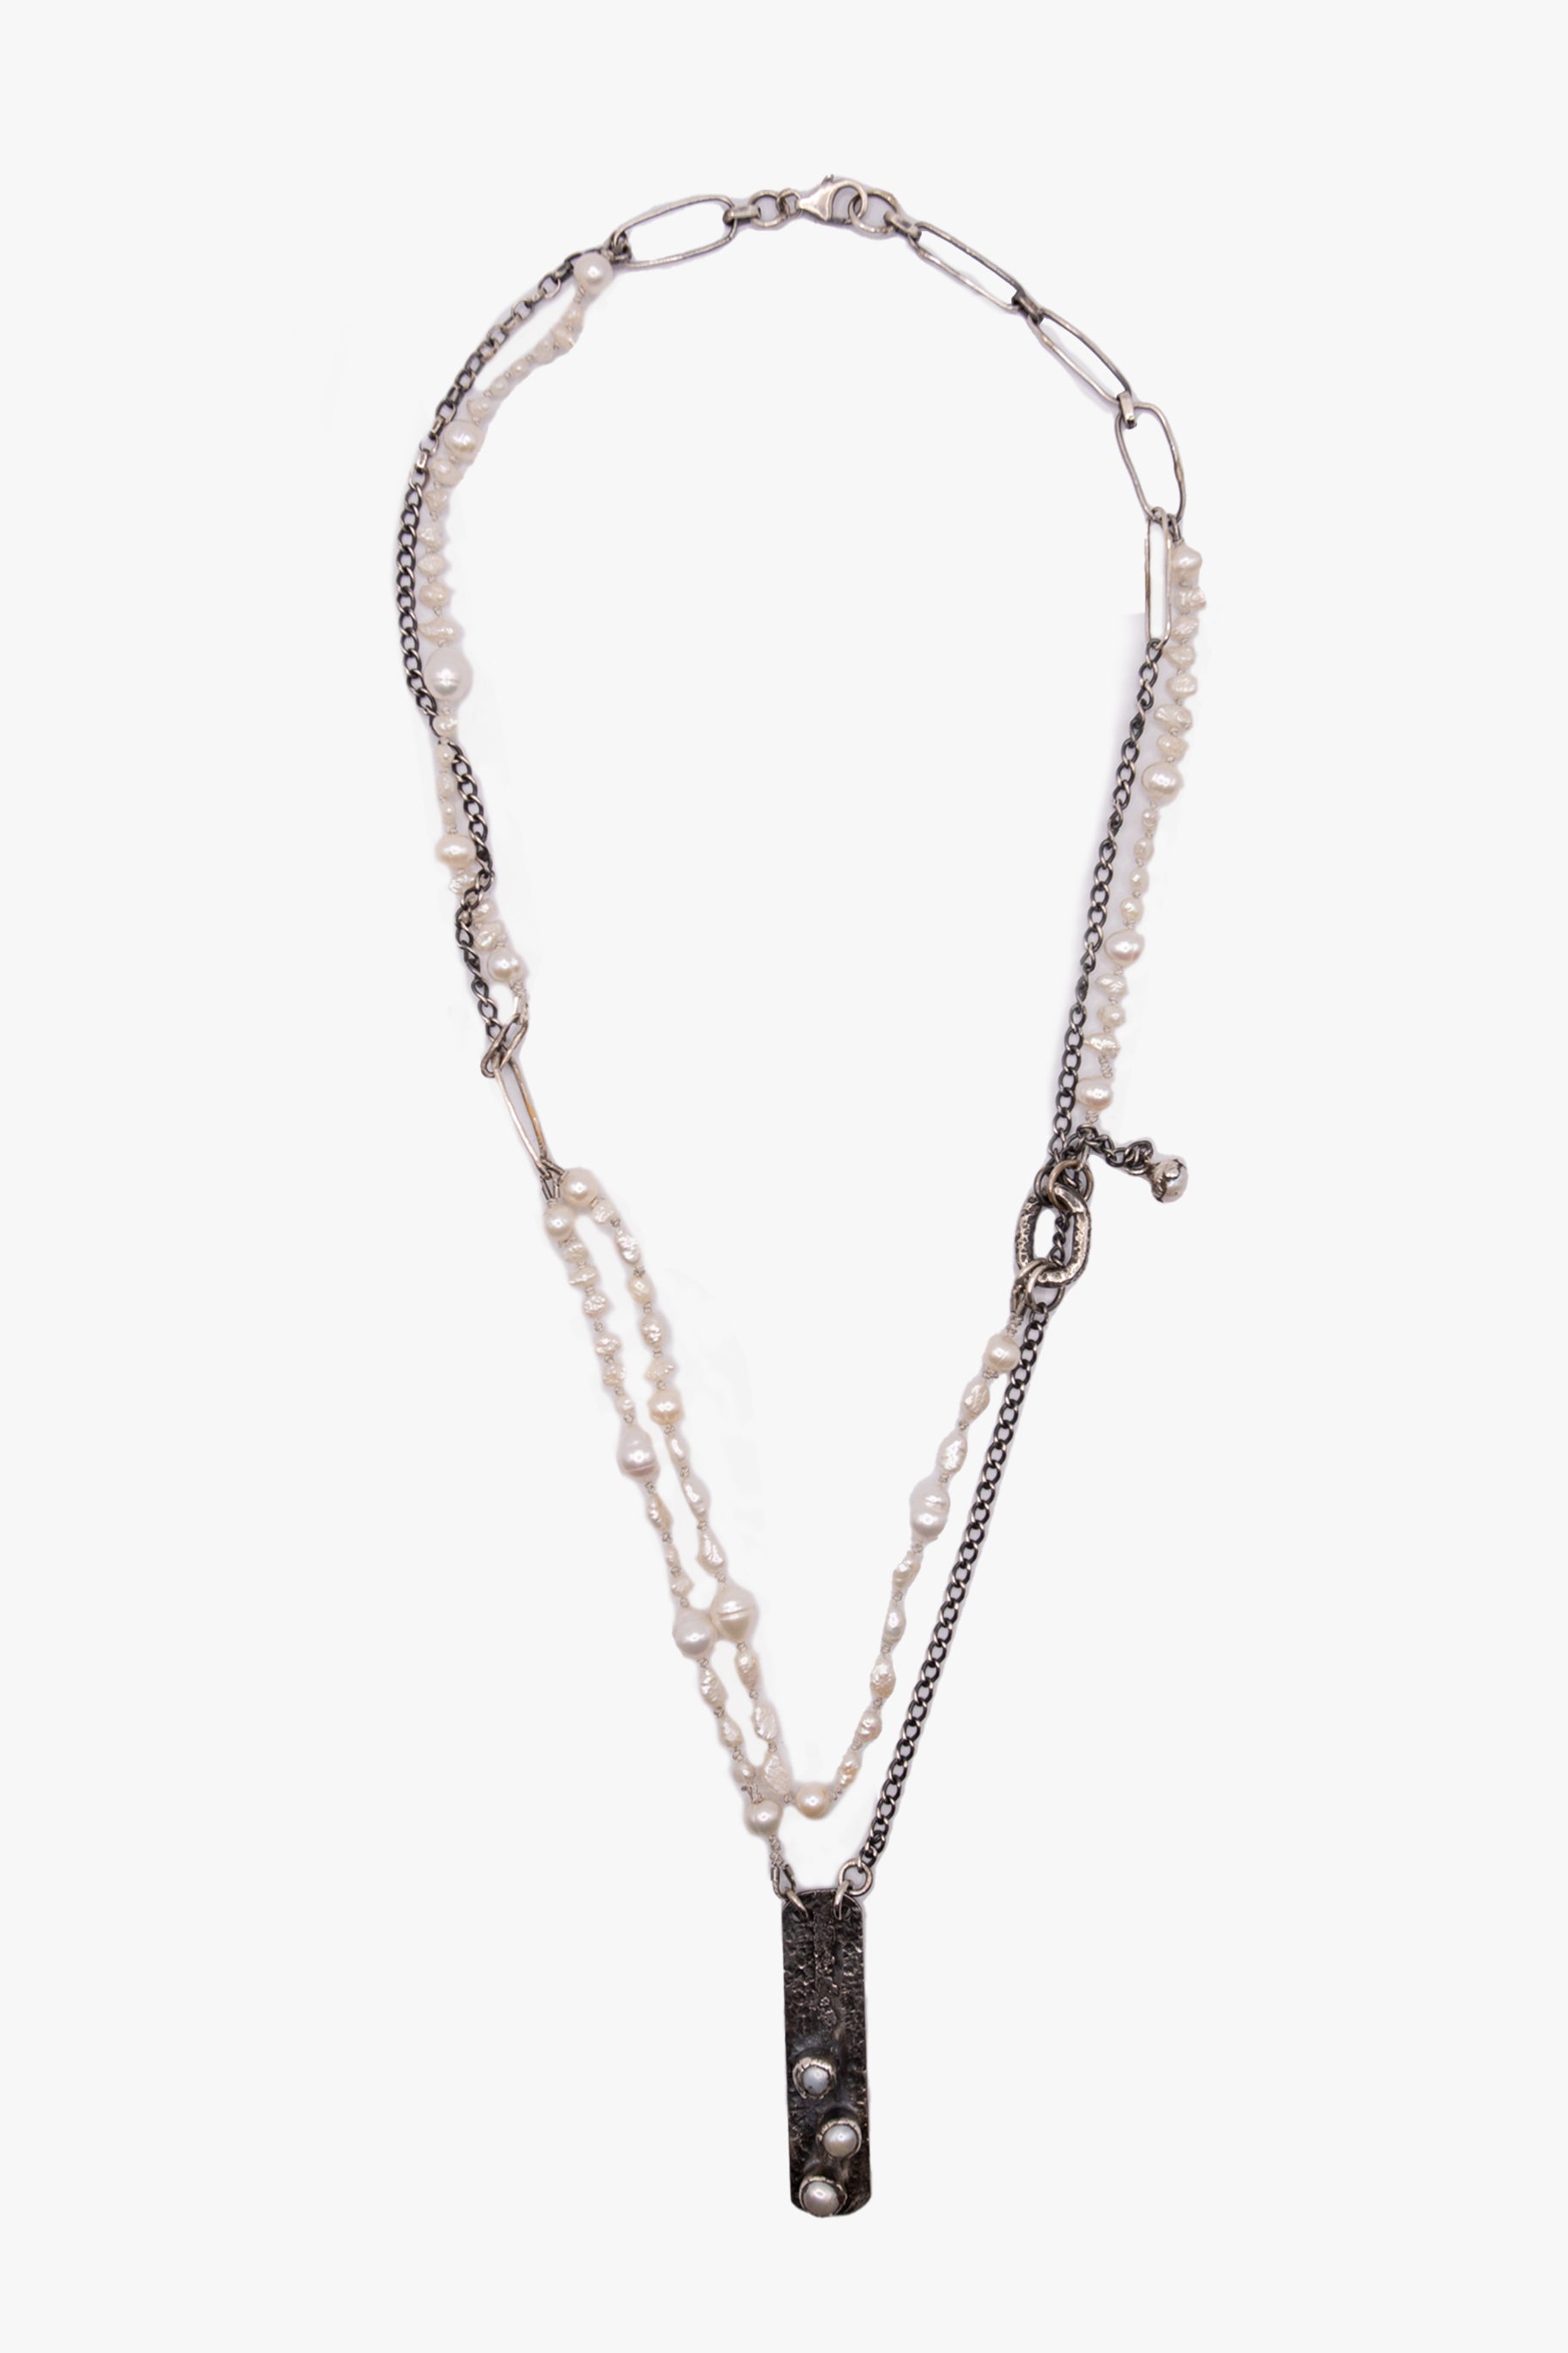 NX24 Pearl Tag Necklace